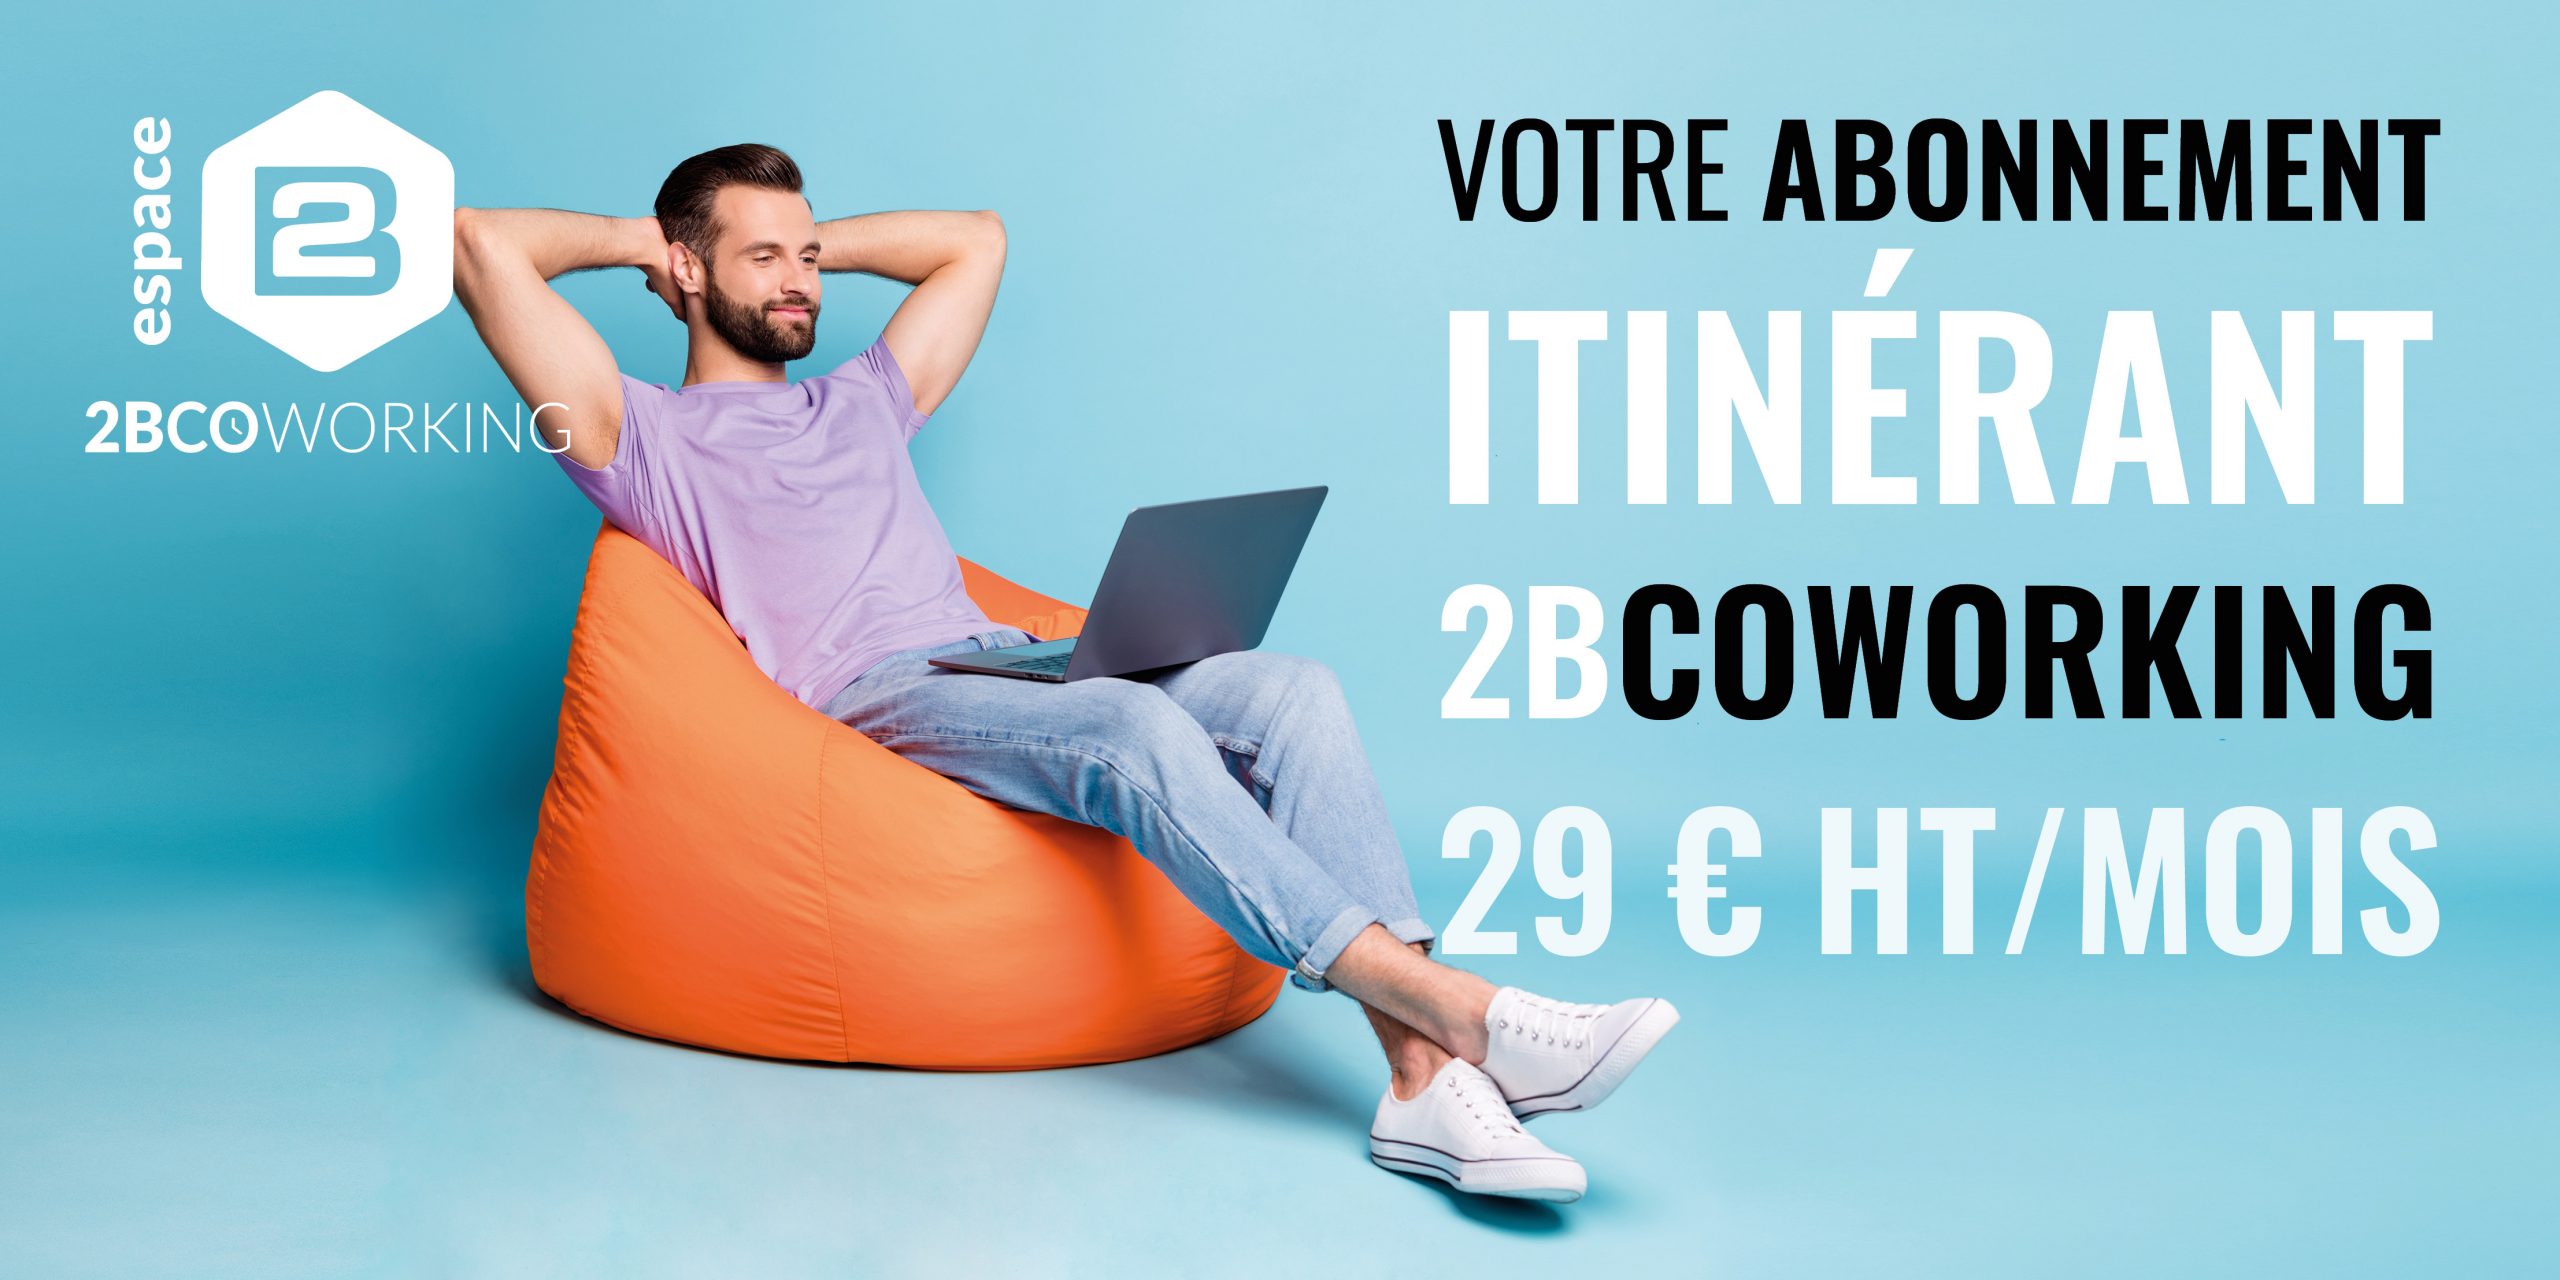 abonnement itinerant 2 scaled 2BCoworking